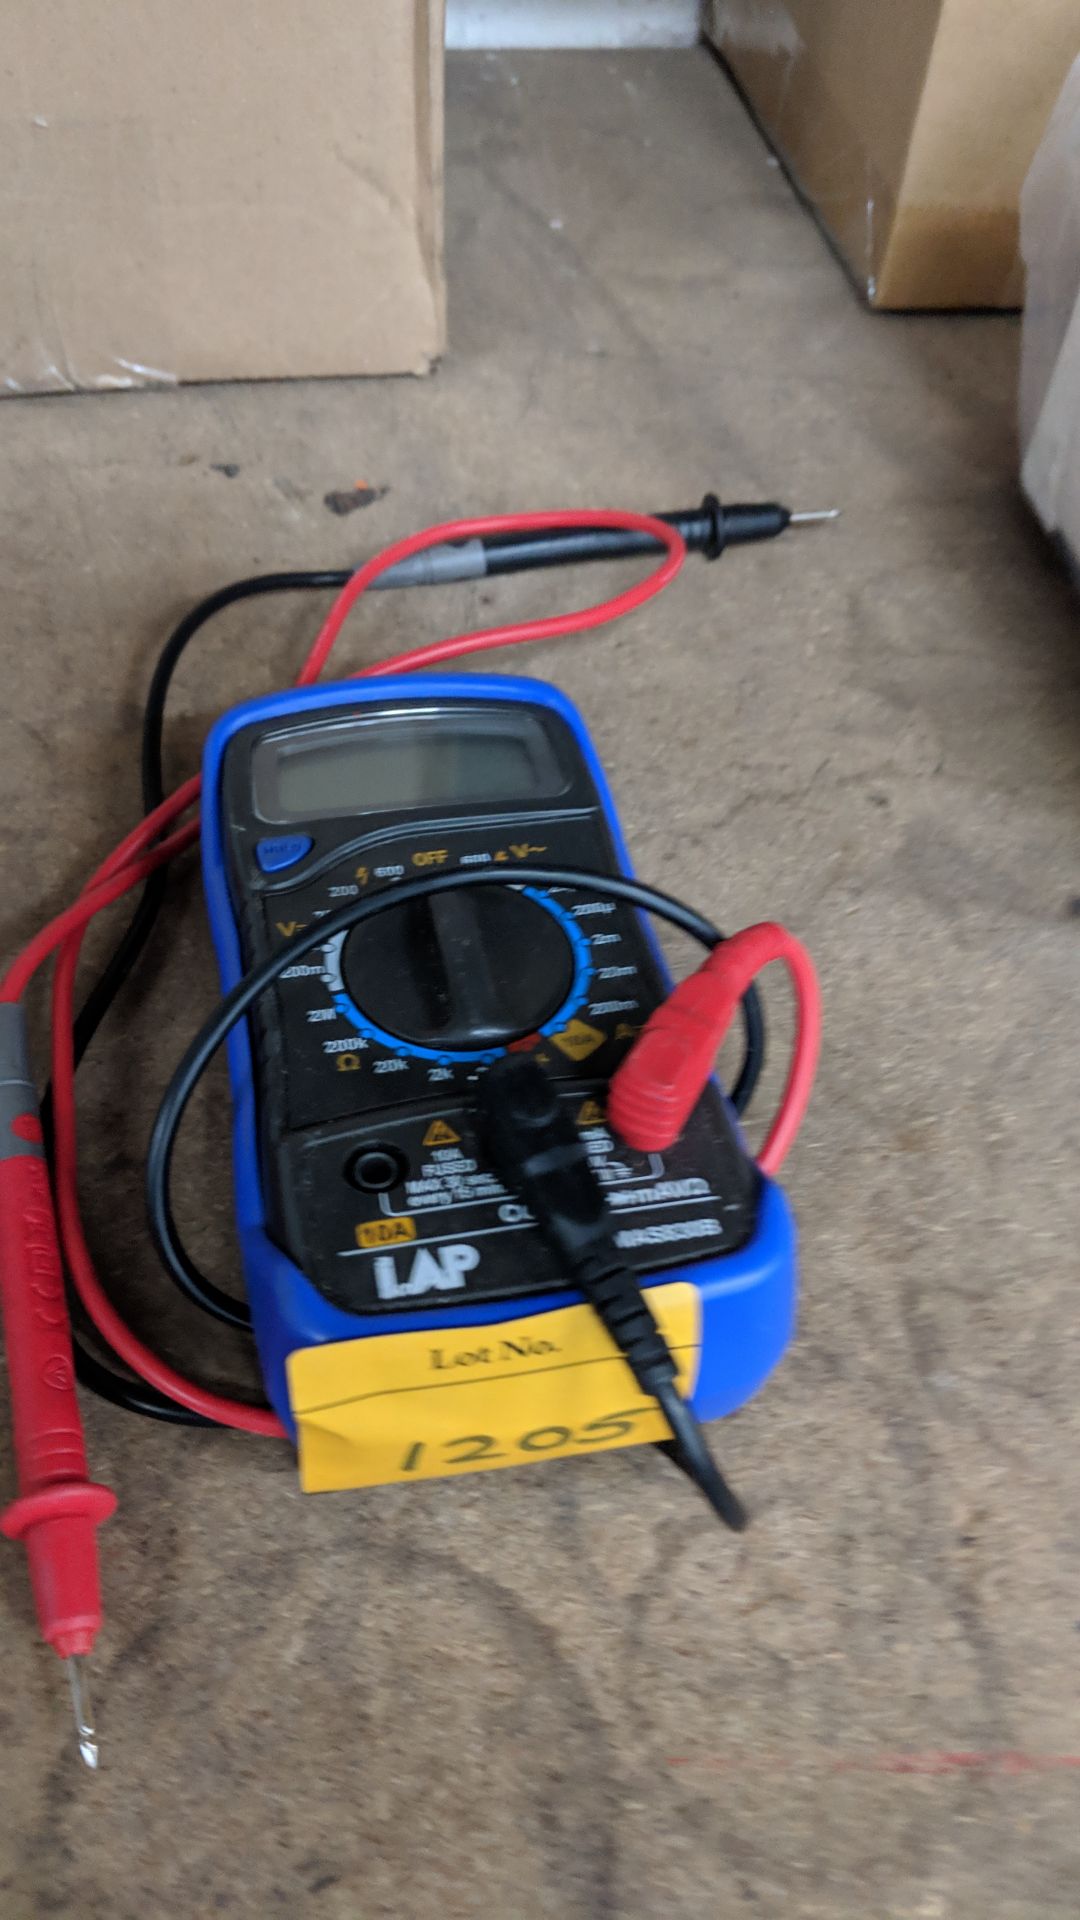 Lap model MAS830B electronic testing device This lot is one of a number of lots being sold on behalf